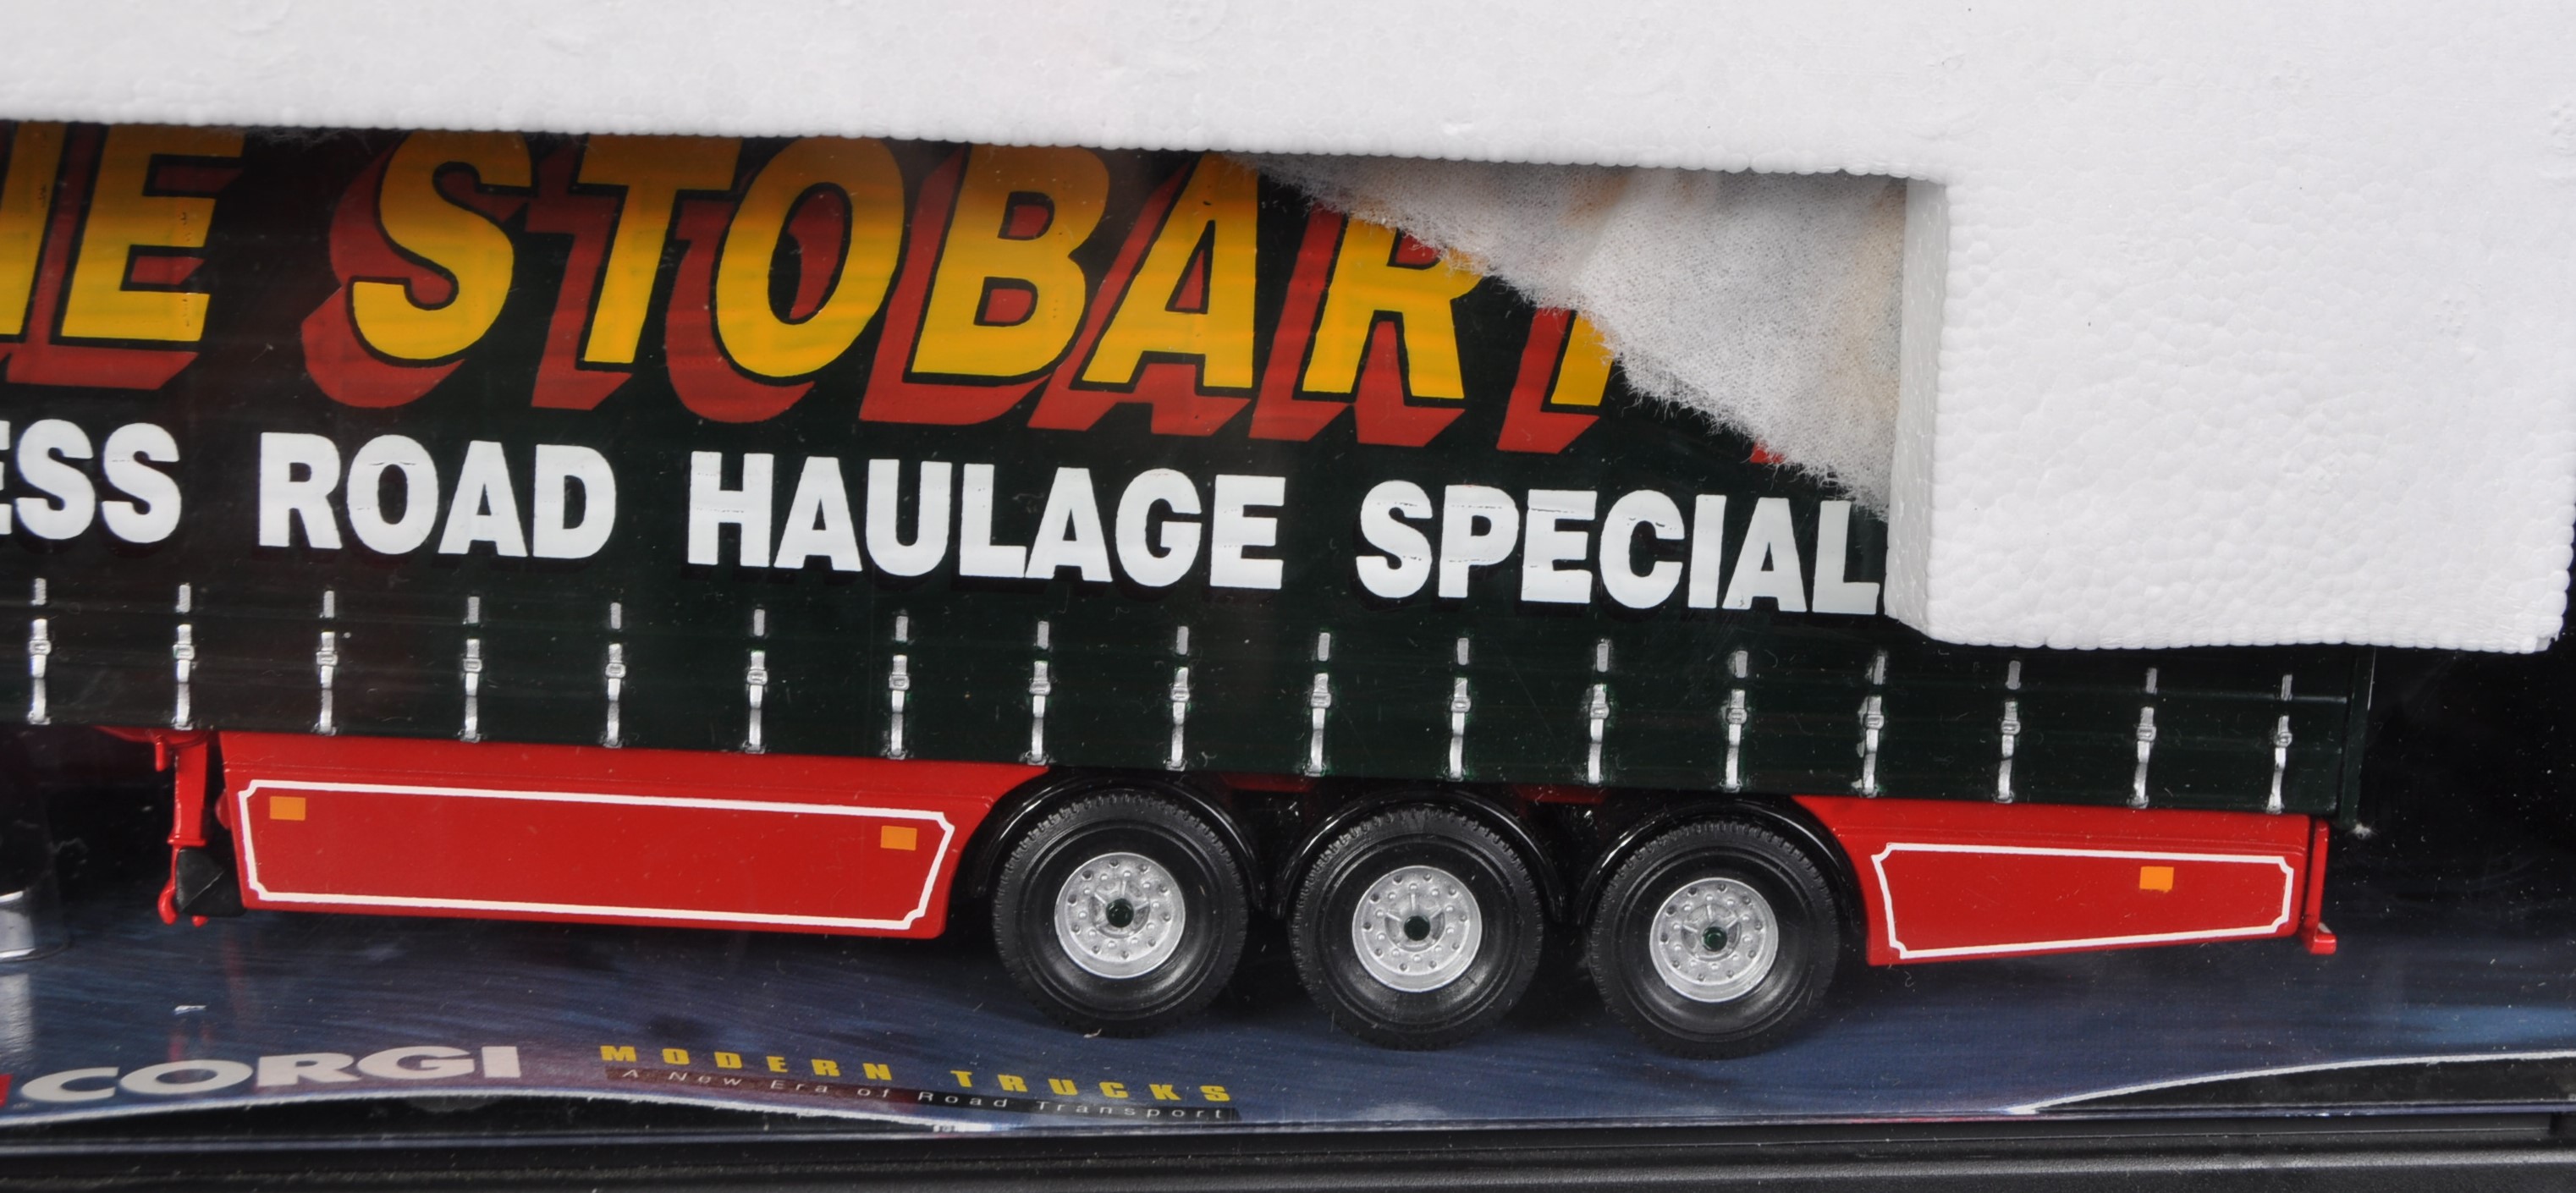 COLLECTION OF ASSORTED CORGI EDDIE STOBART DIECAST MODELS - Image 5 of 7